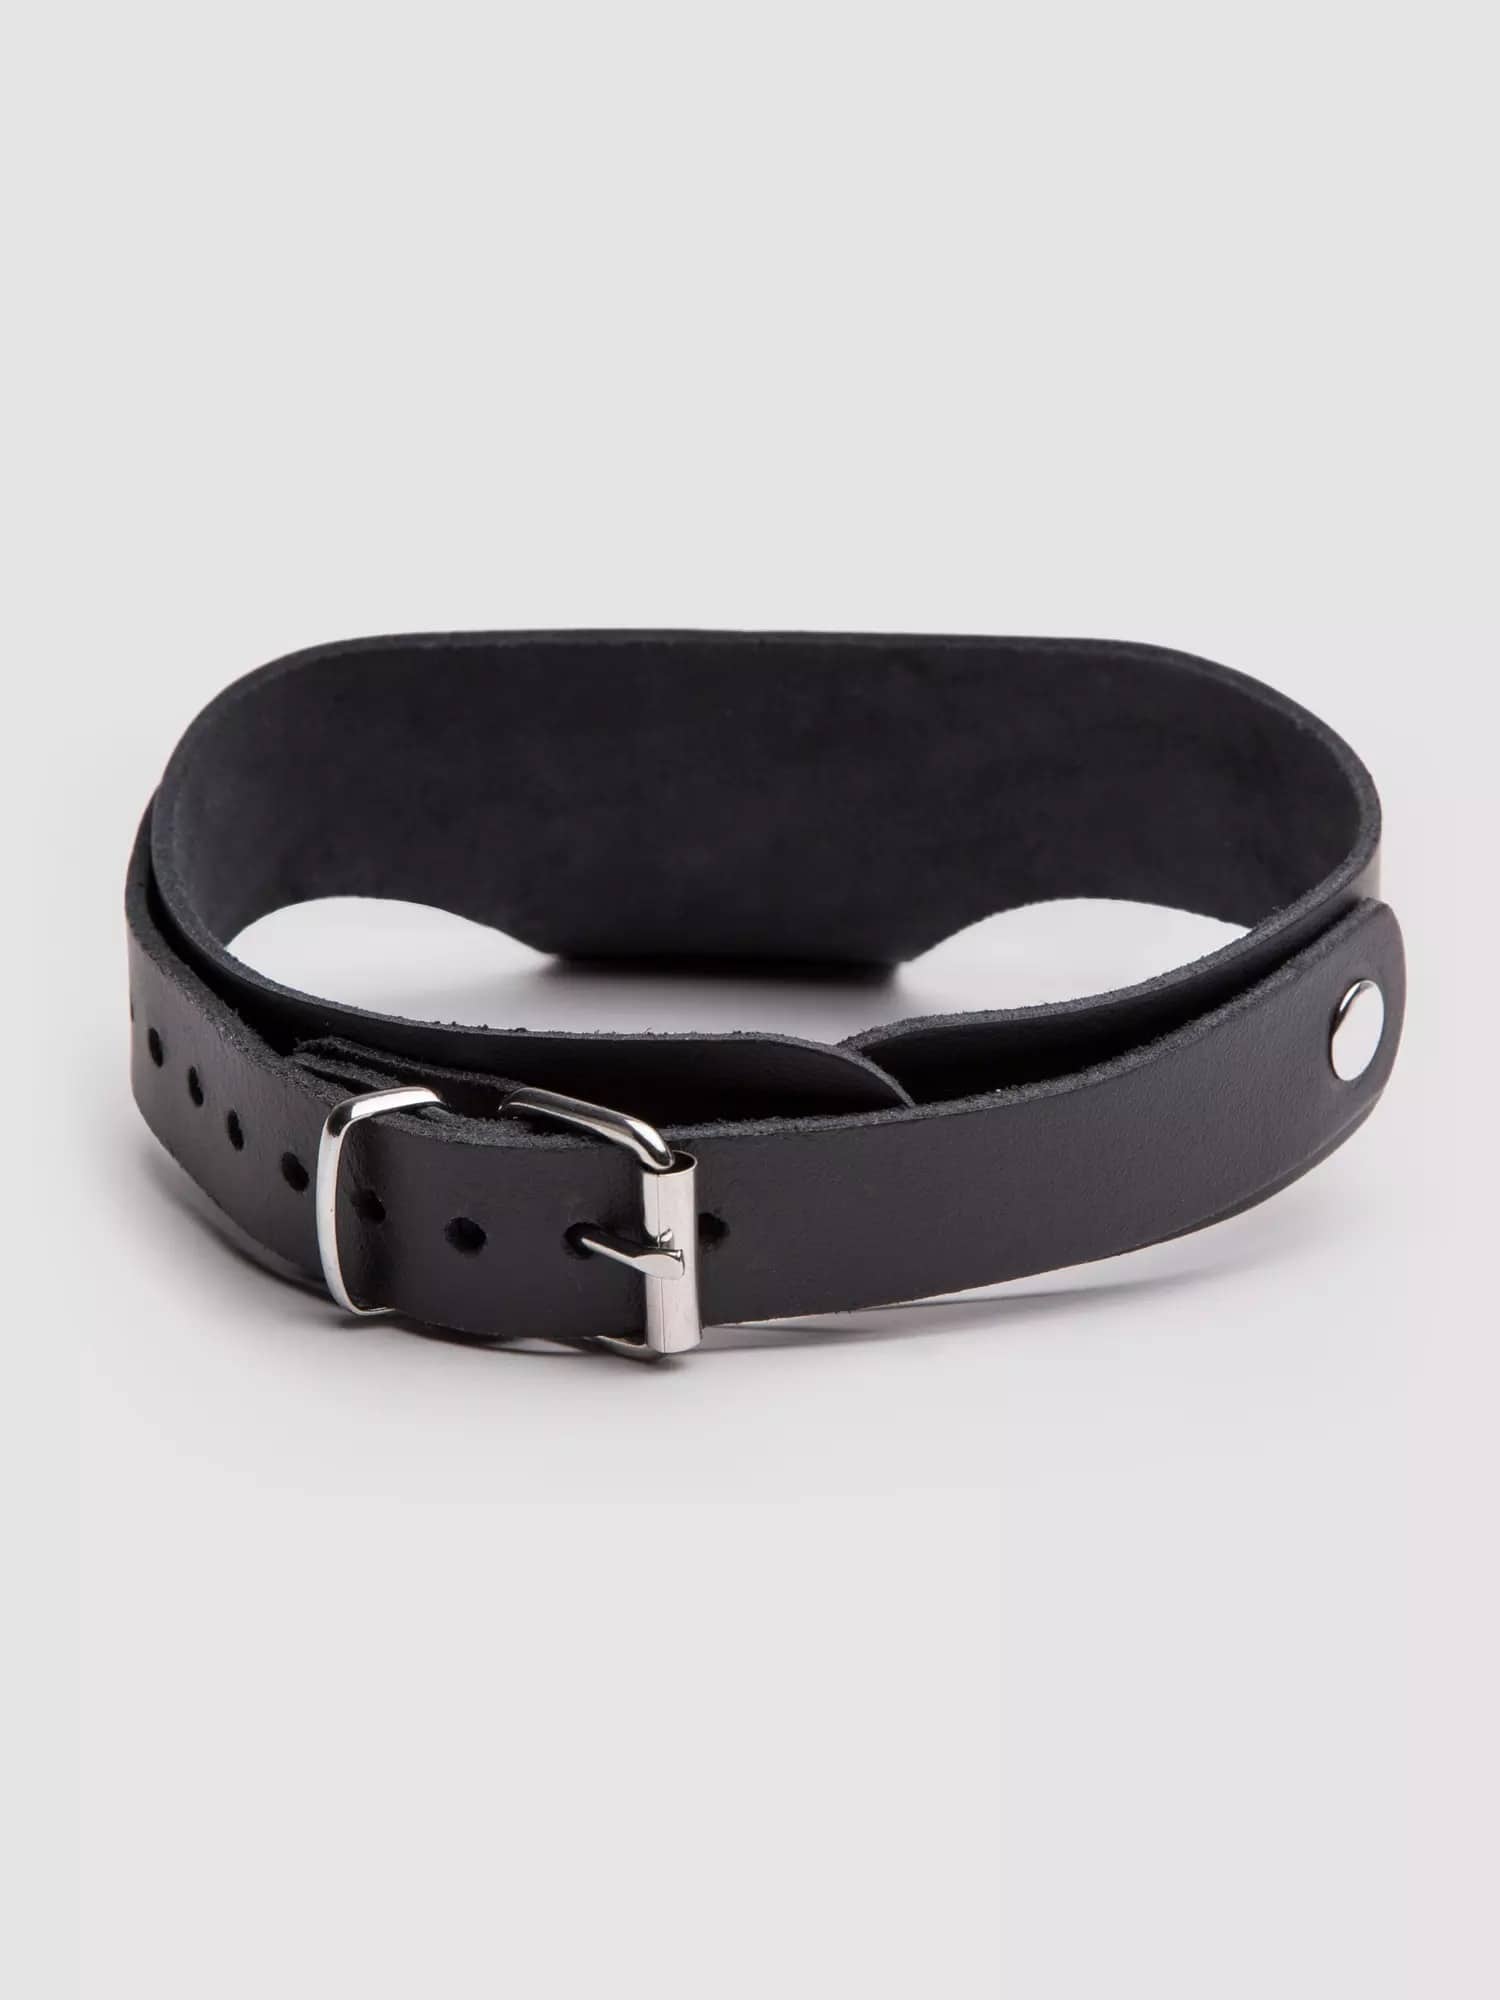 DOMINIX Deluxe Leather Collar with Cock Ring. Slide 2